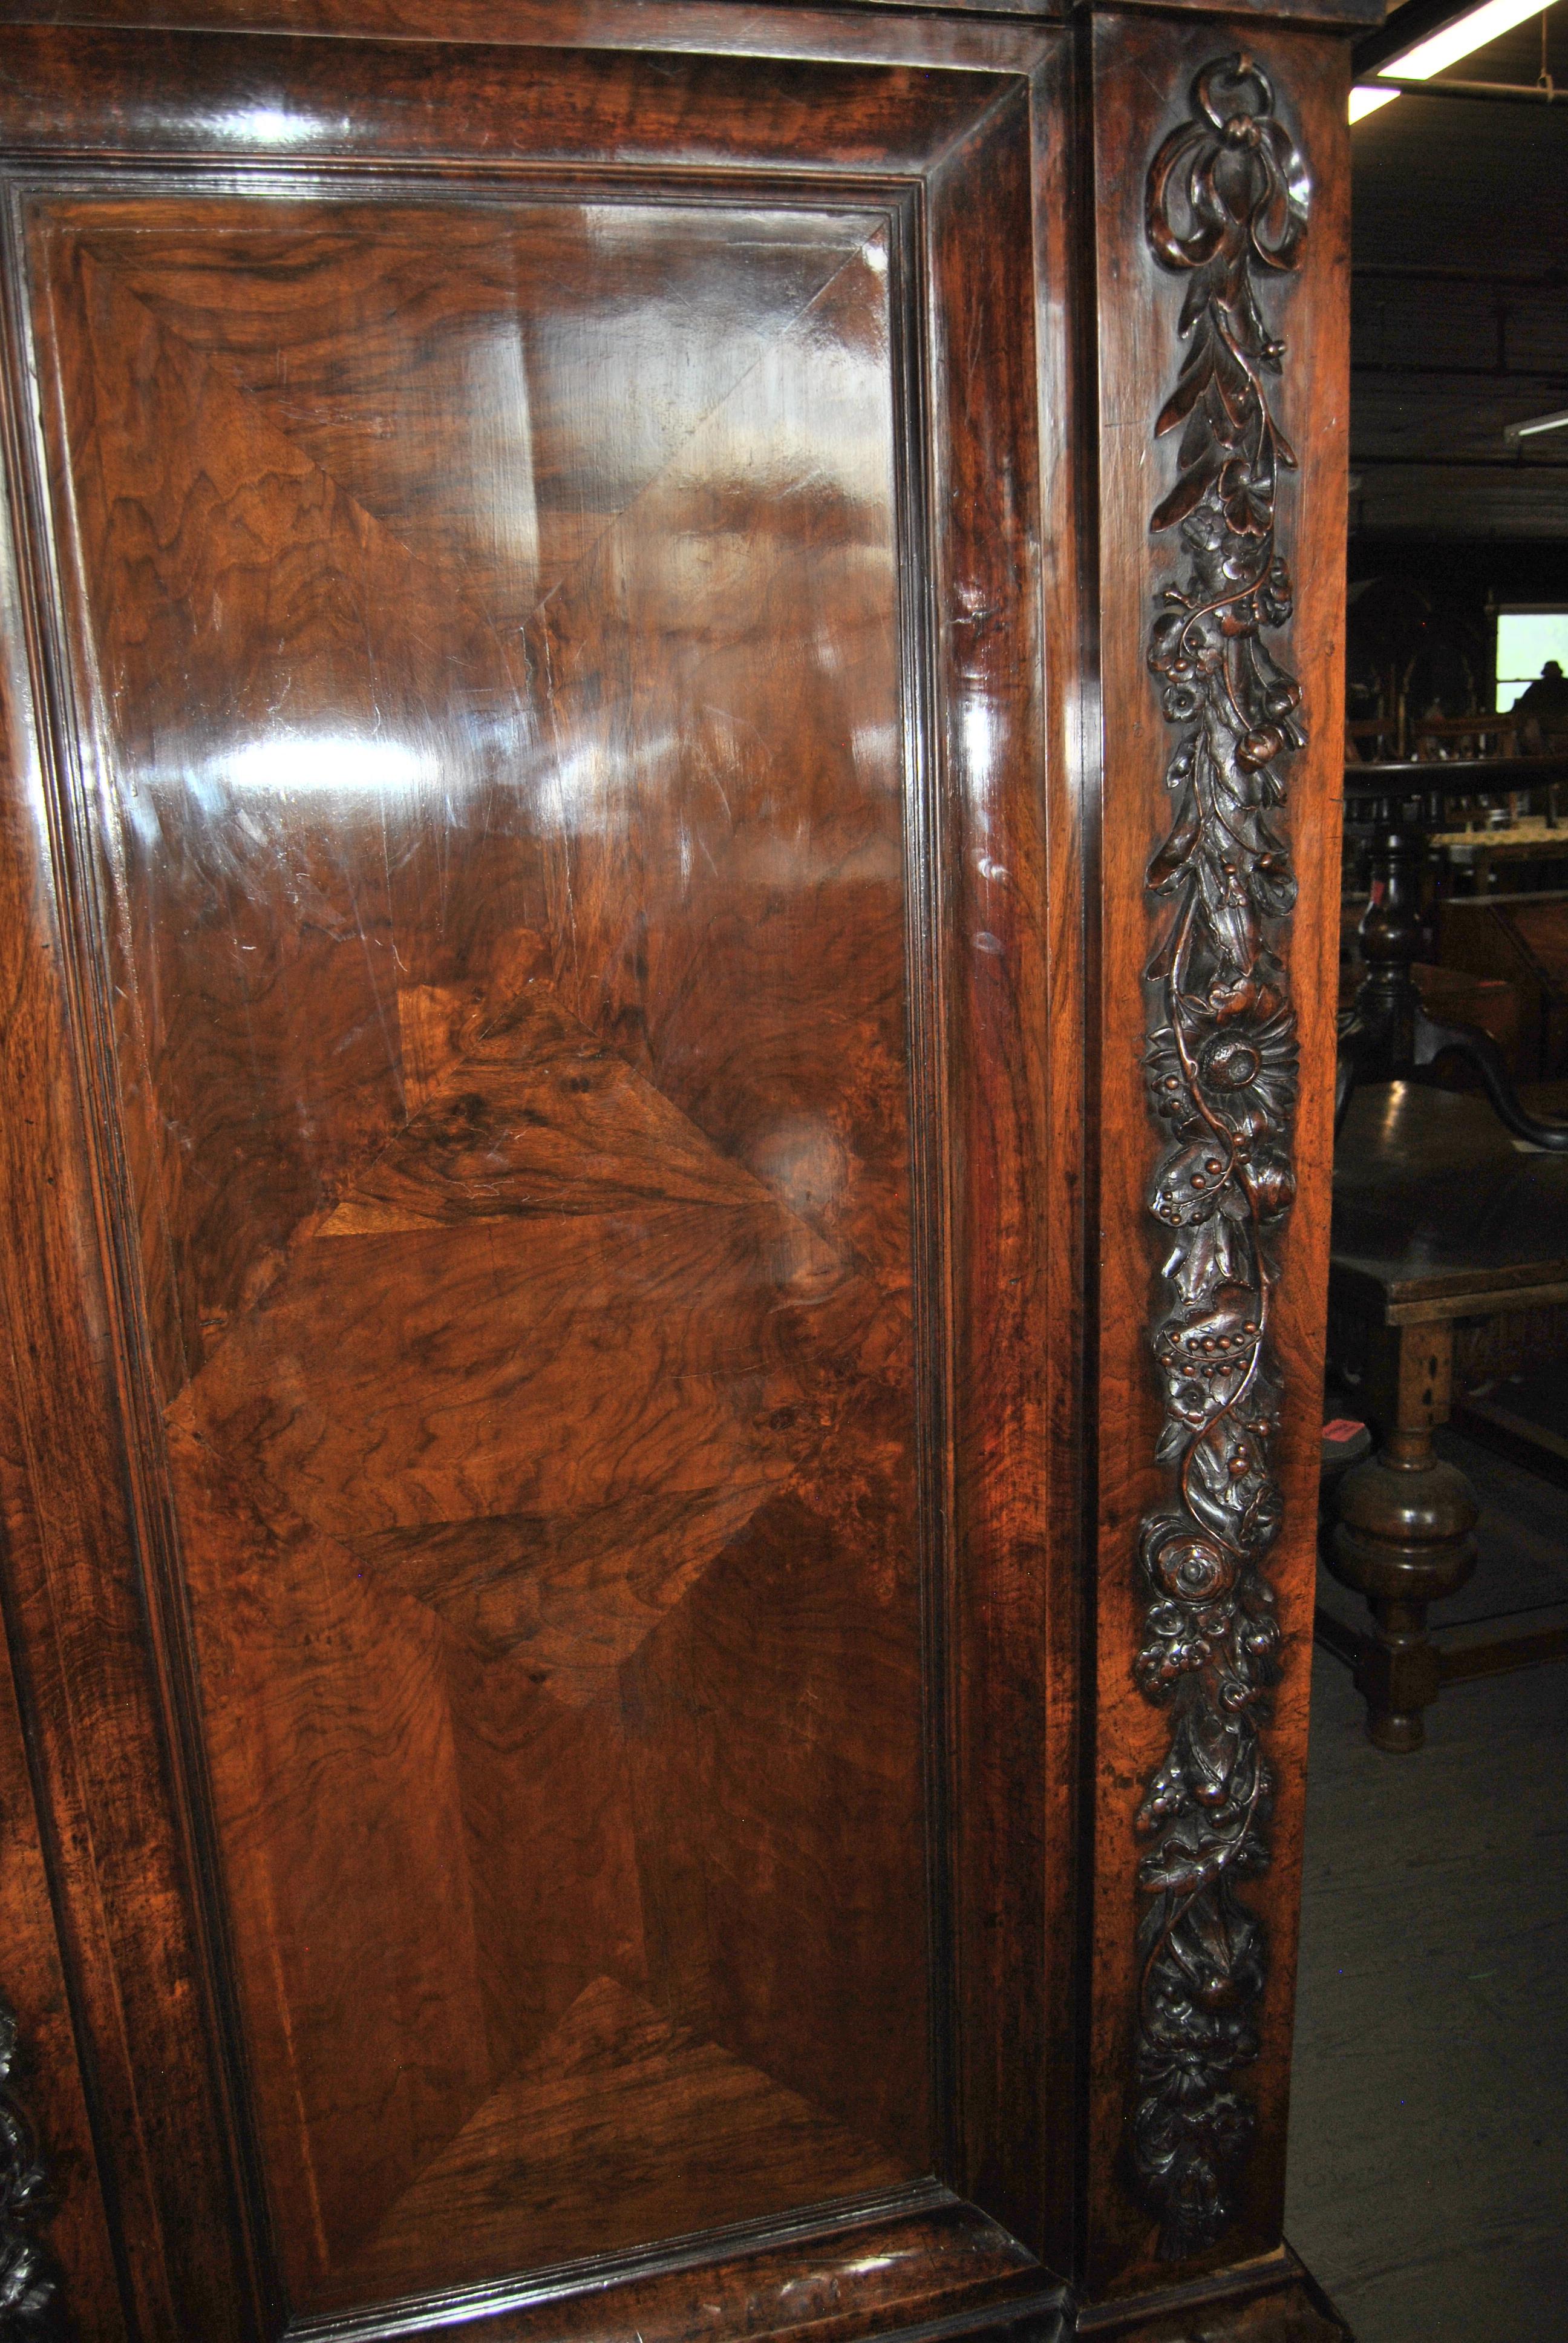 This is a fabulous quality, very unusual mahogany 2-door armoire made in France, circa 1800. The crown on the top of the Armoire is well layered and very bold. There is a remarkable hand carved medallion on the front top of the Armoire. It is deeply